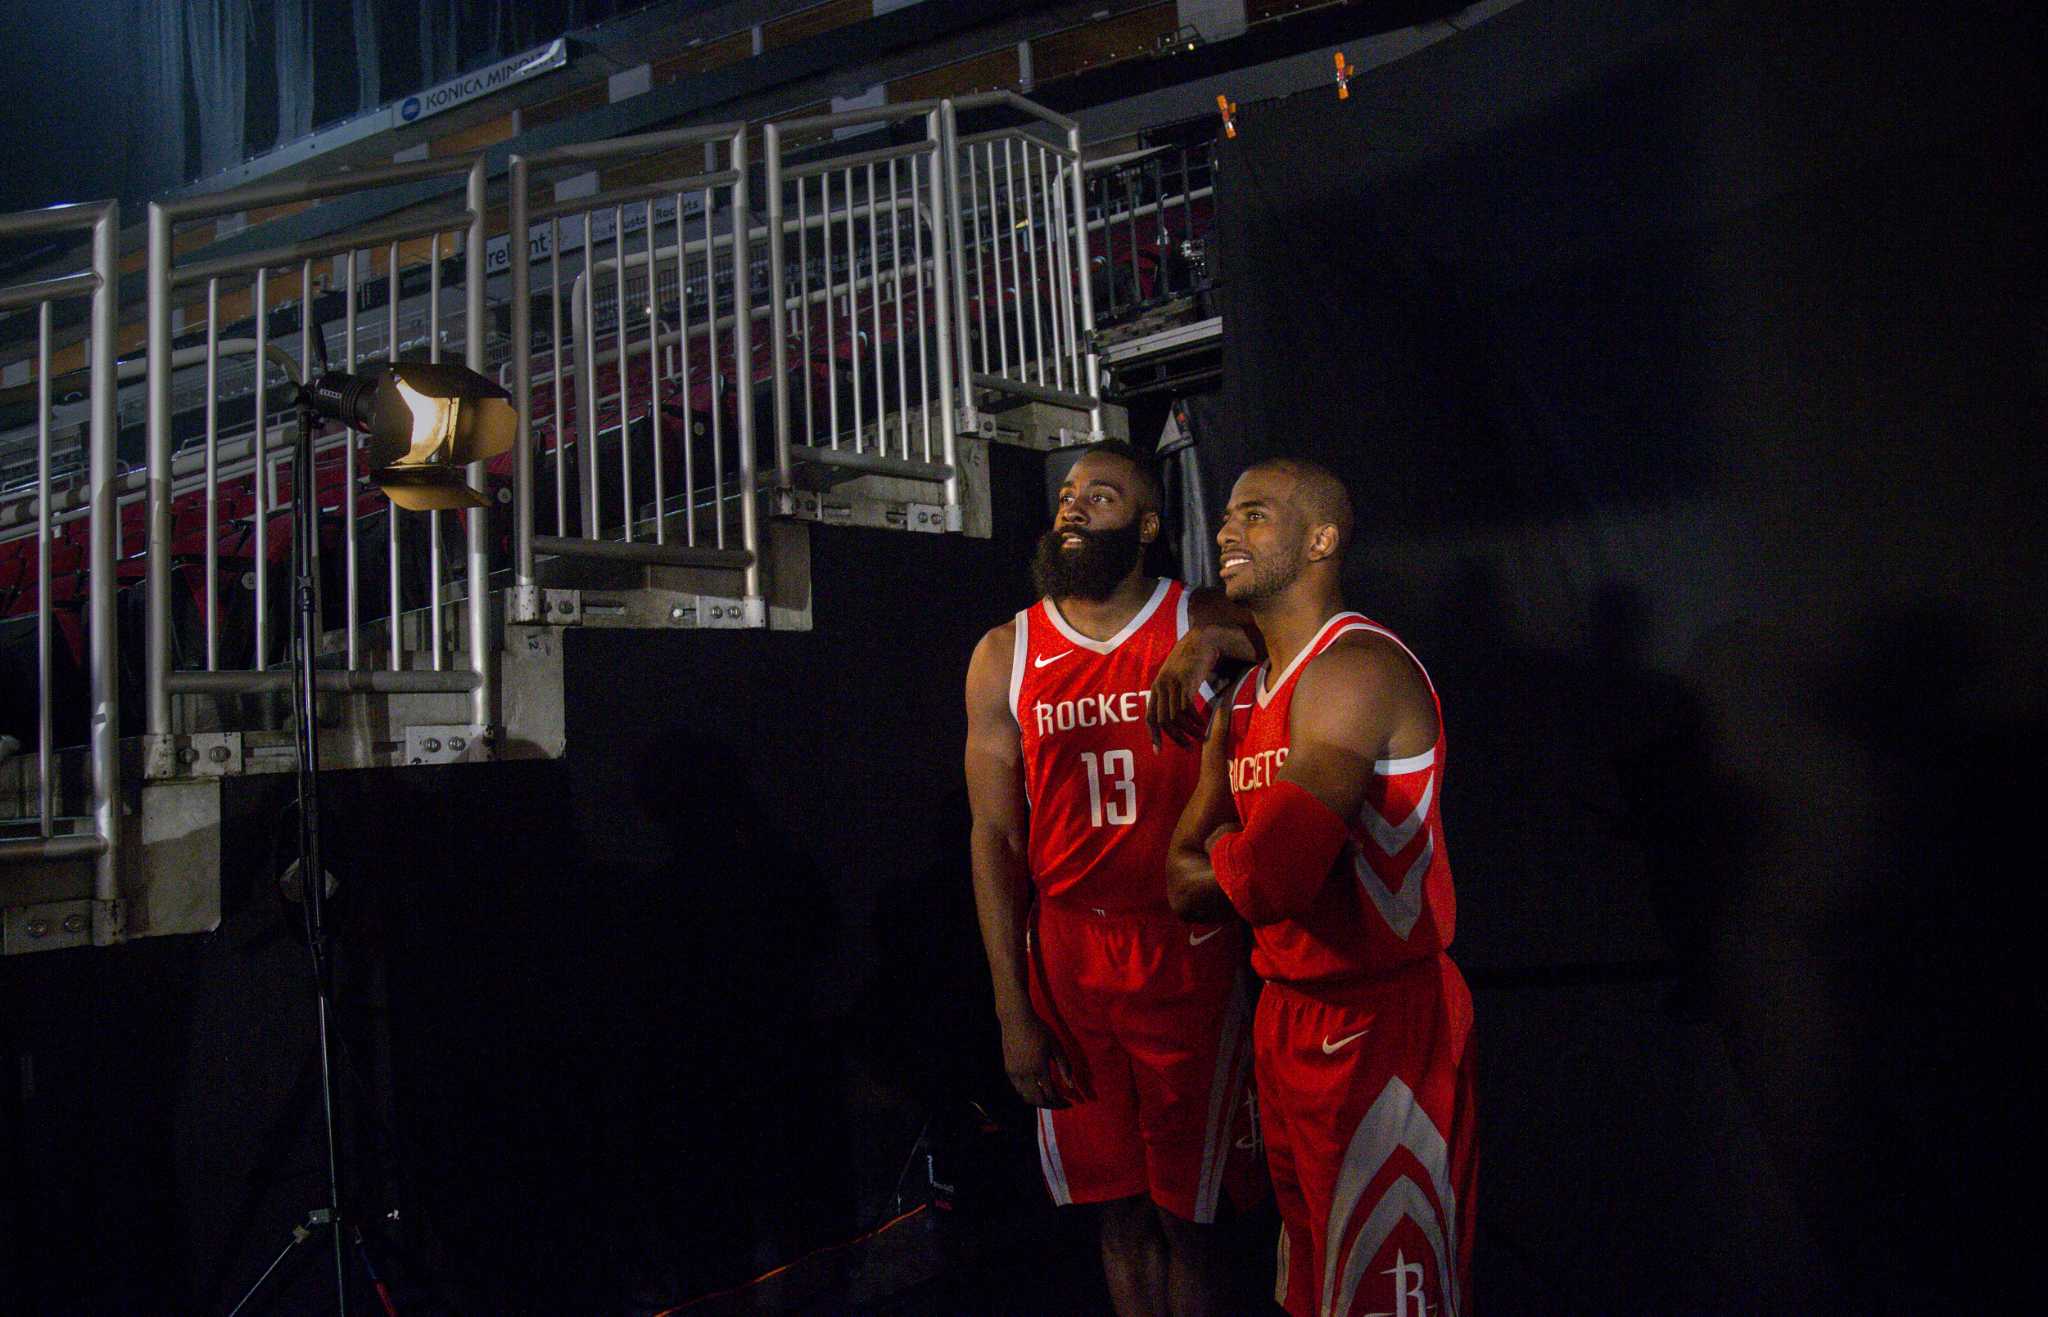 Behind the scenes at Rockets media day